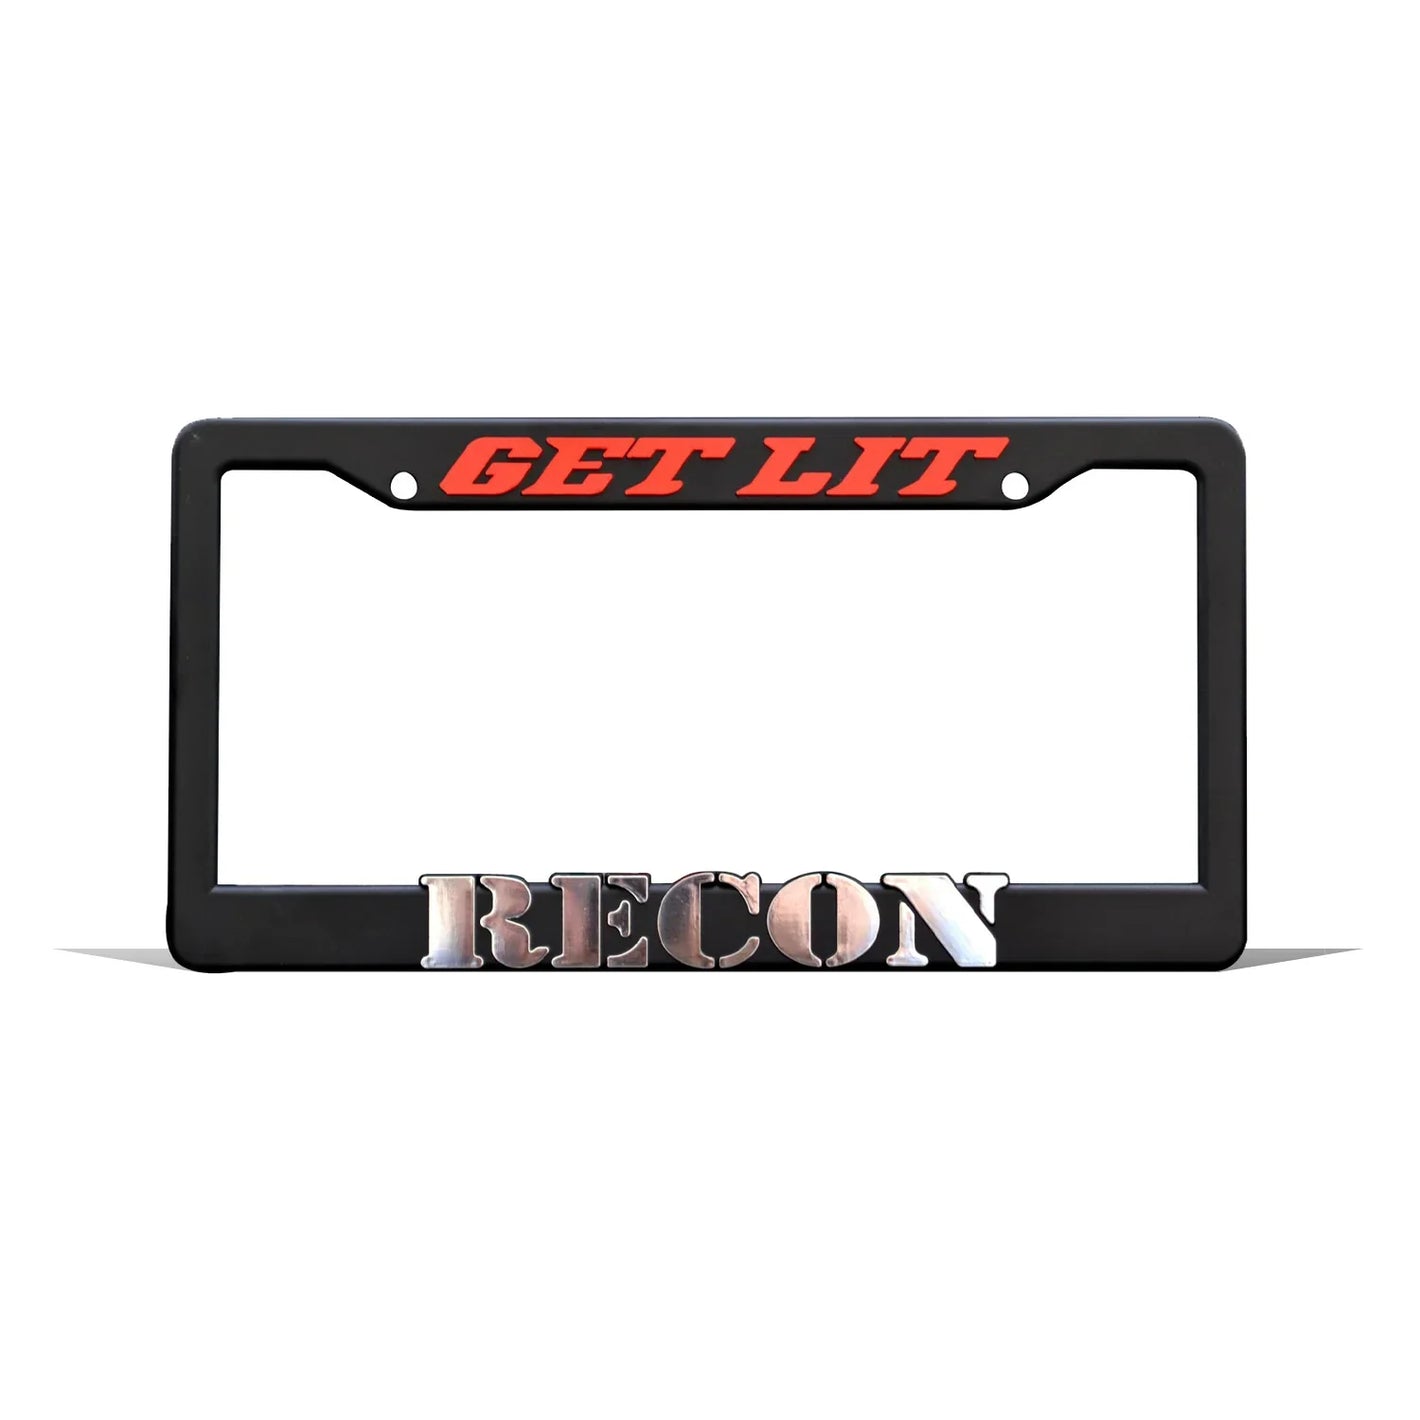 RECON License Plate Frames